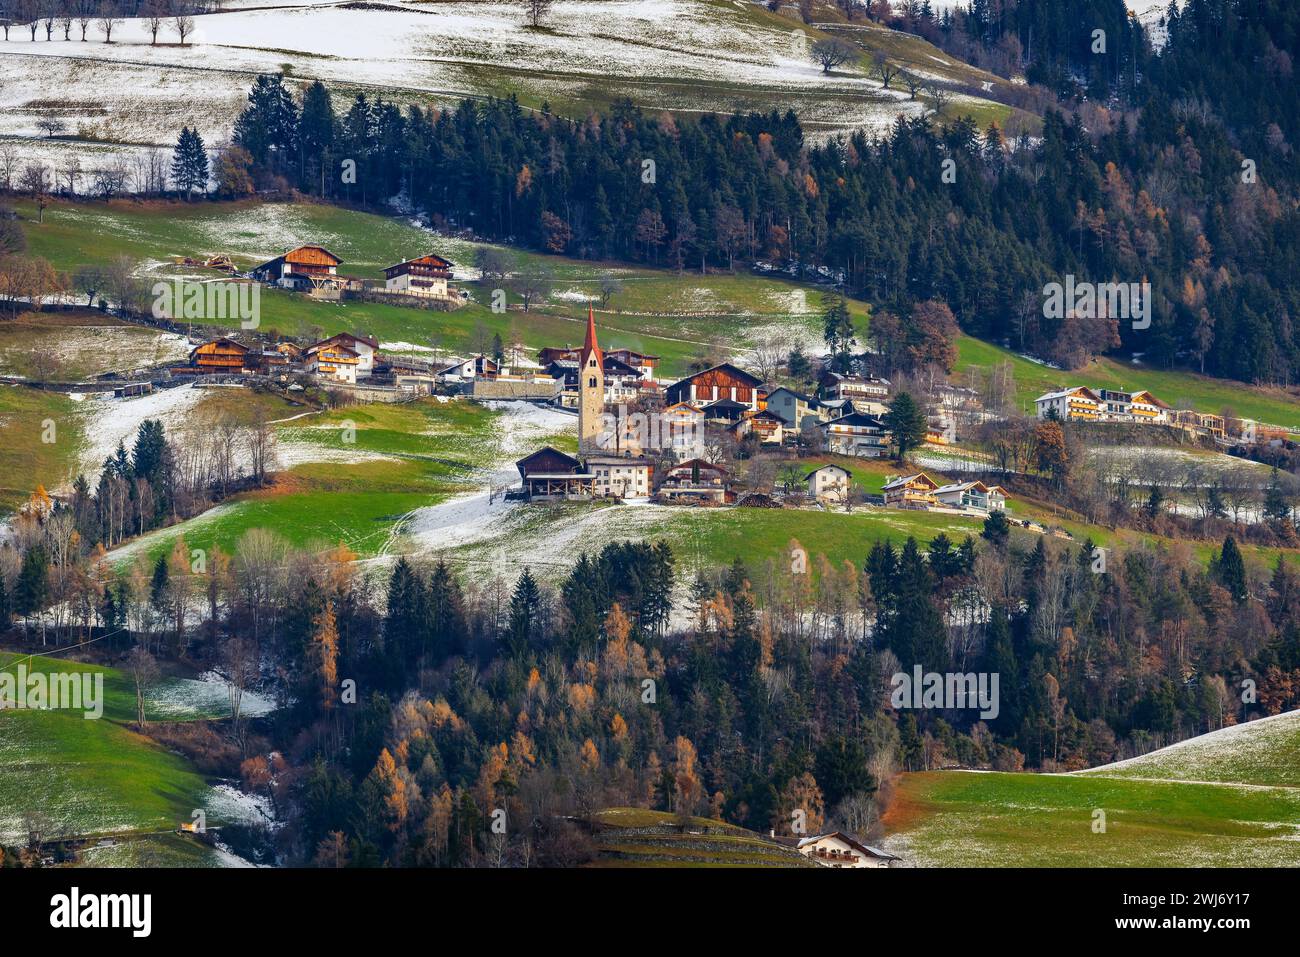 Picturesque mountain village in a scenic late autumn landscape, South Tyrol, Italy Stock Photo